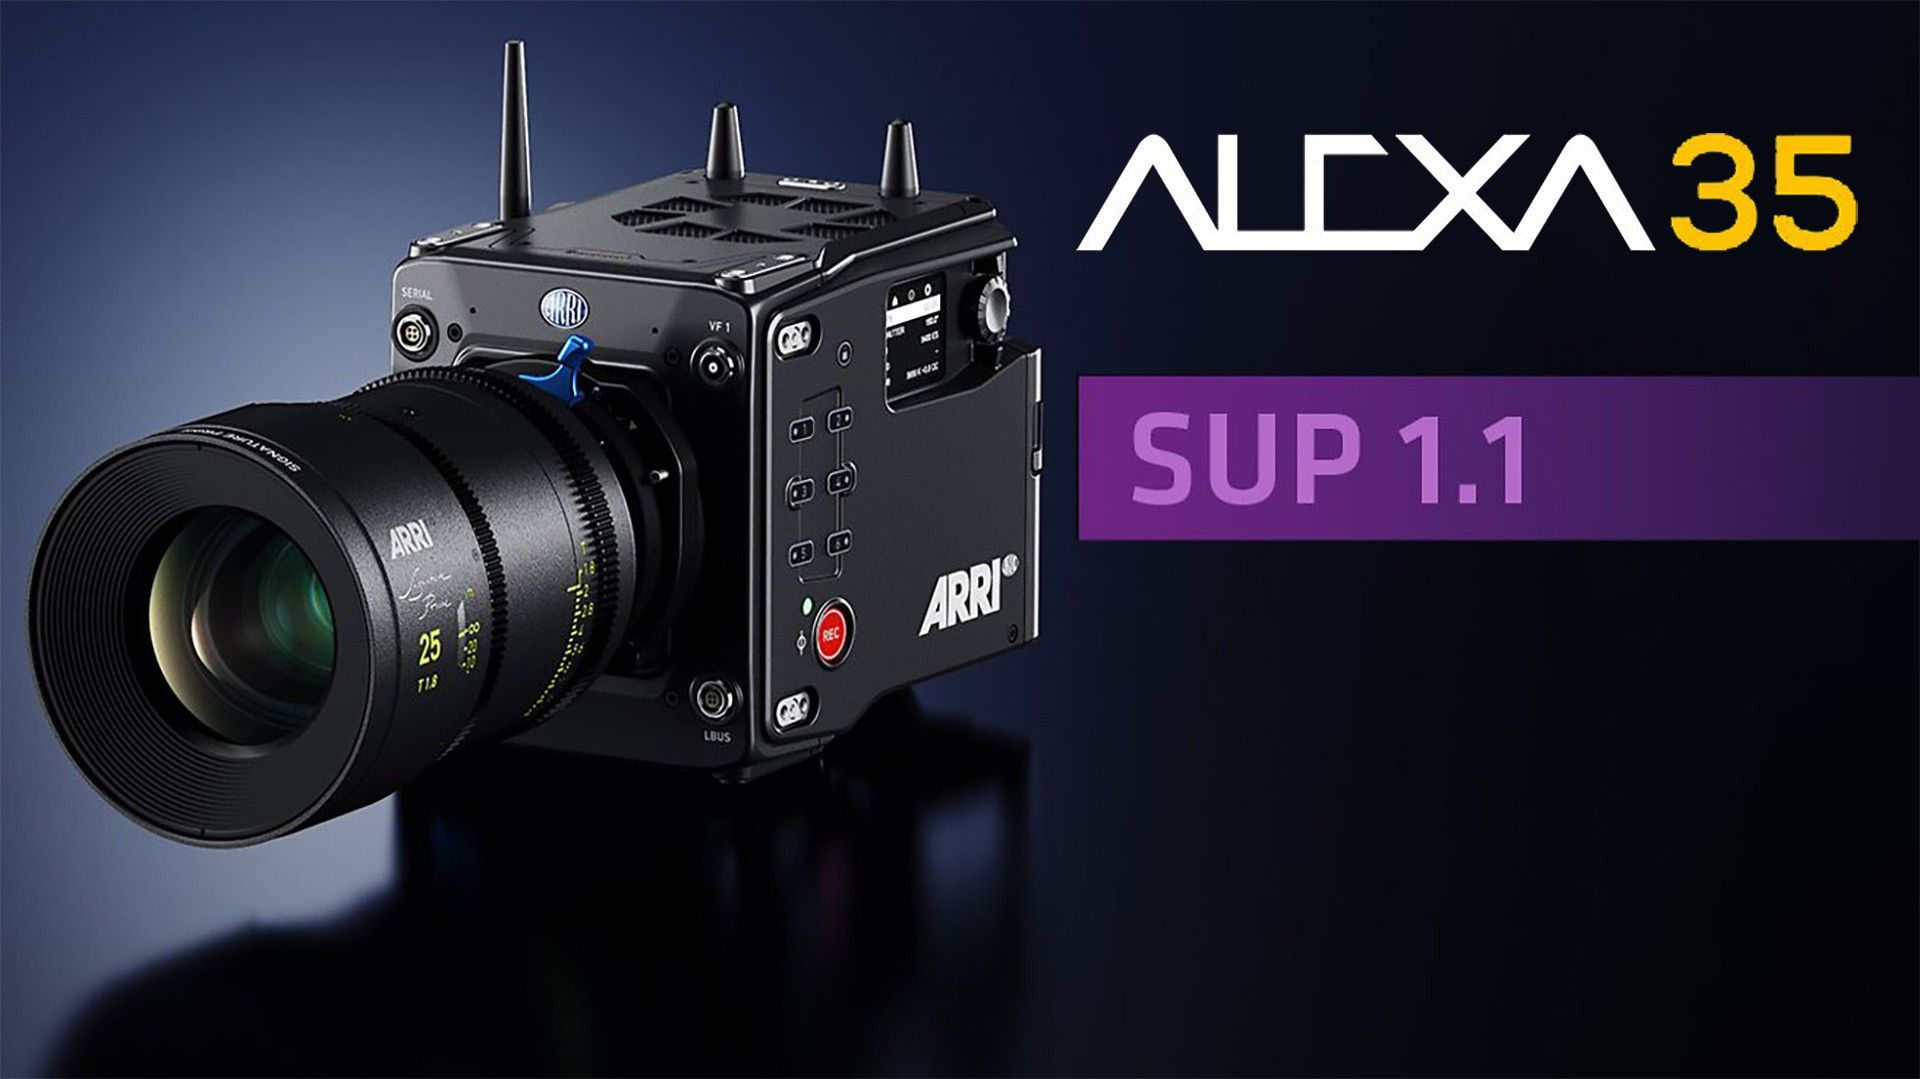 What Can We Learn From the ARRI Alexa 35 SUP 1.1 Update?